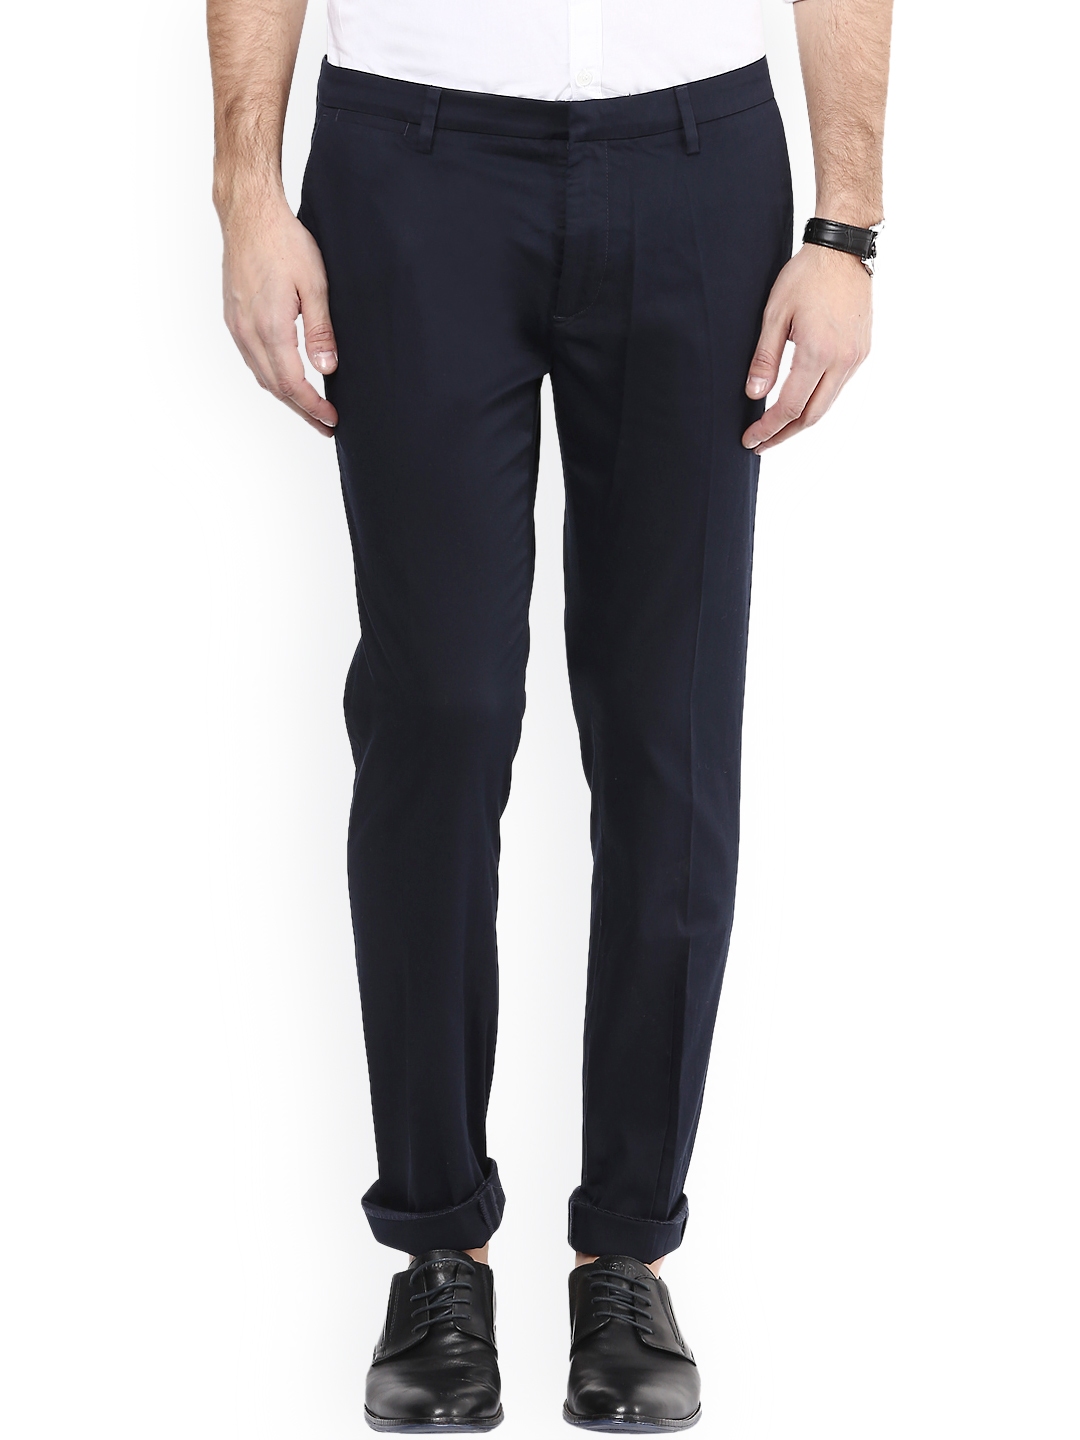 Buy Mufti Navy Pencil Fit Chino Trousers  Trousers for Men 1435282  Myntra